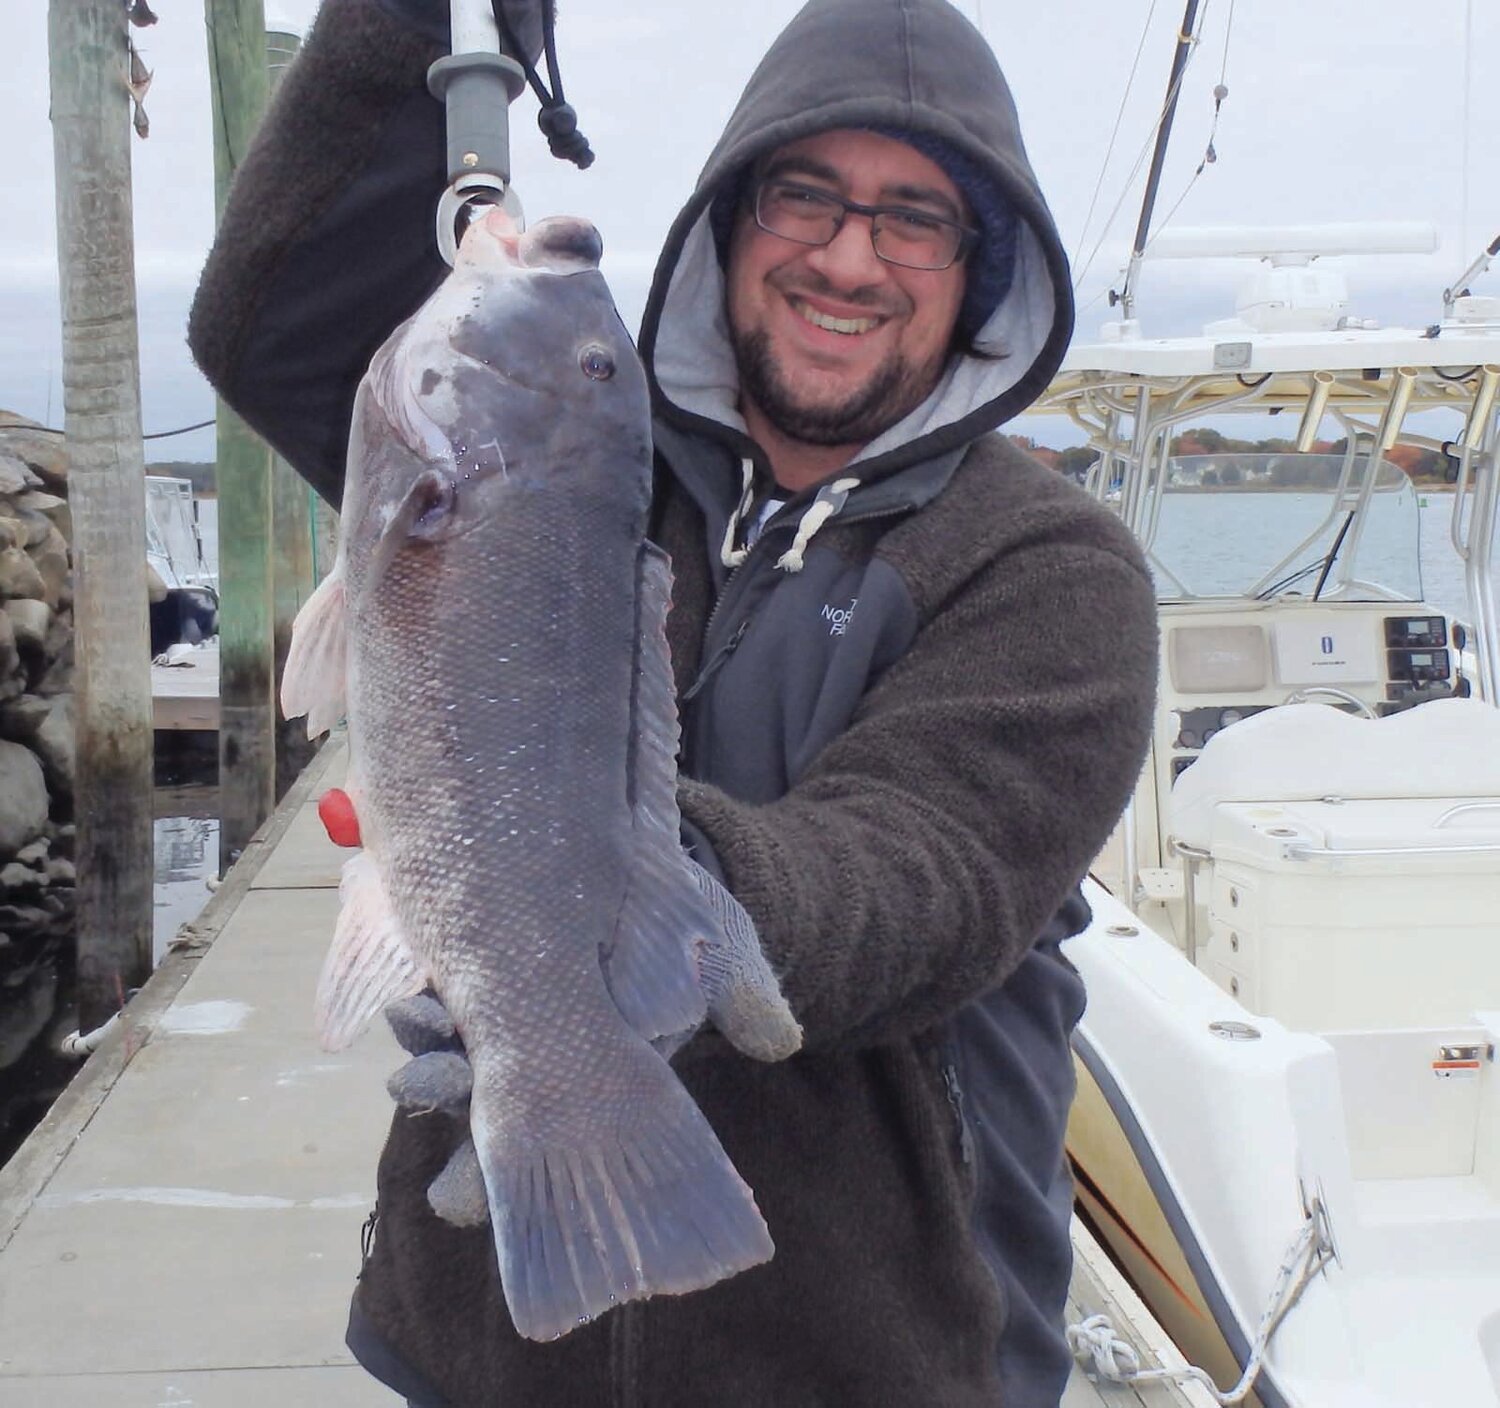 TAUTOG SEASON: Angler Geoff Monti had no trouble catching his limit of tautog off Newport in late October. (Submitted photos)